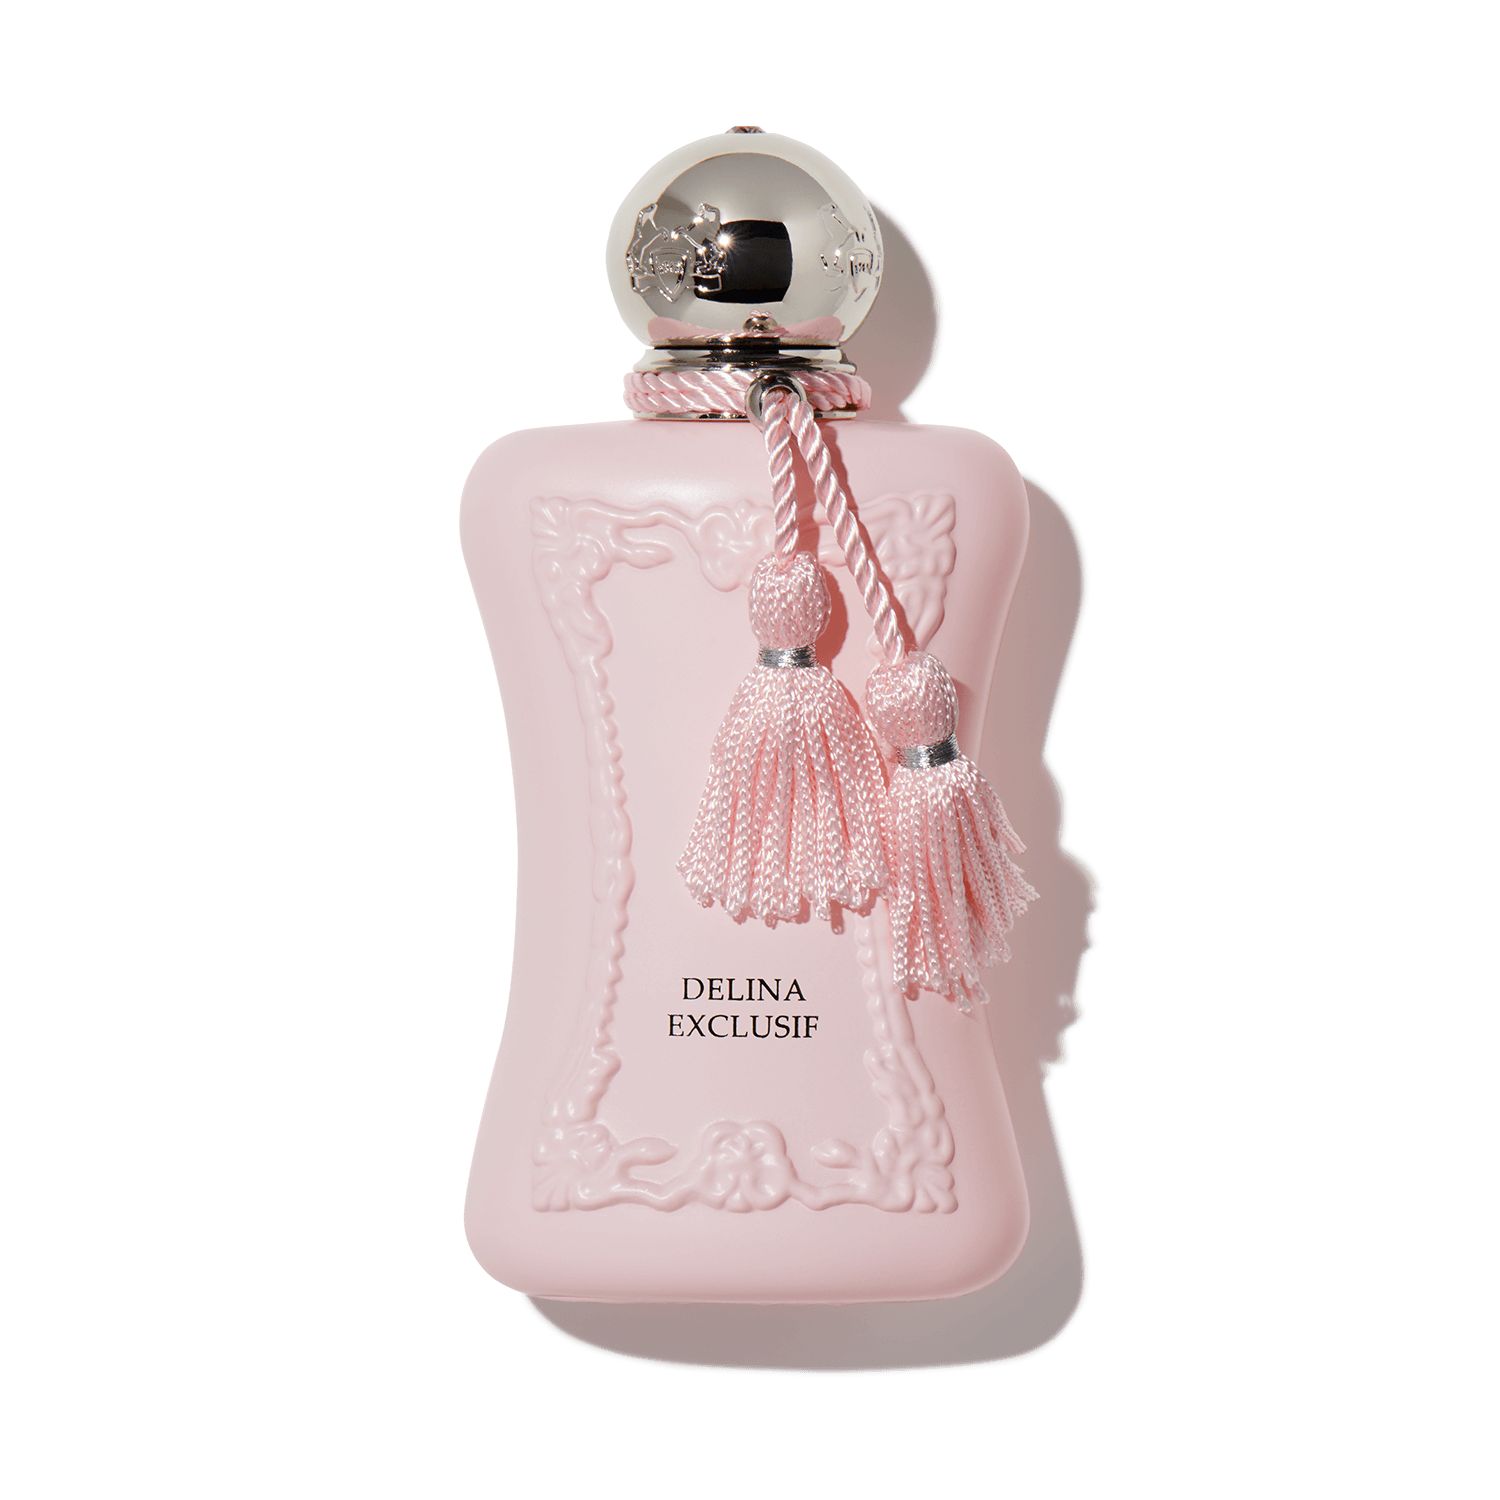 Monthly Supply of Parfums de Marly Delina Exclusif for just $31.95 | Scentbird